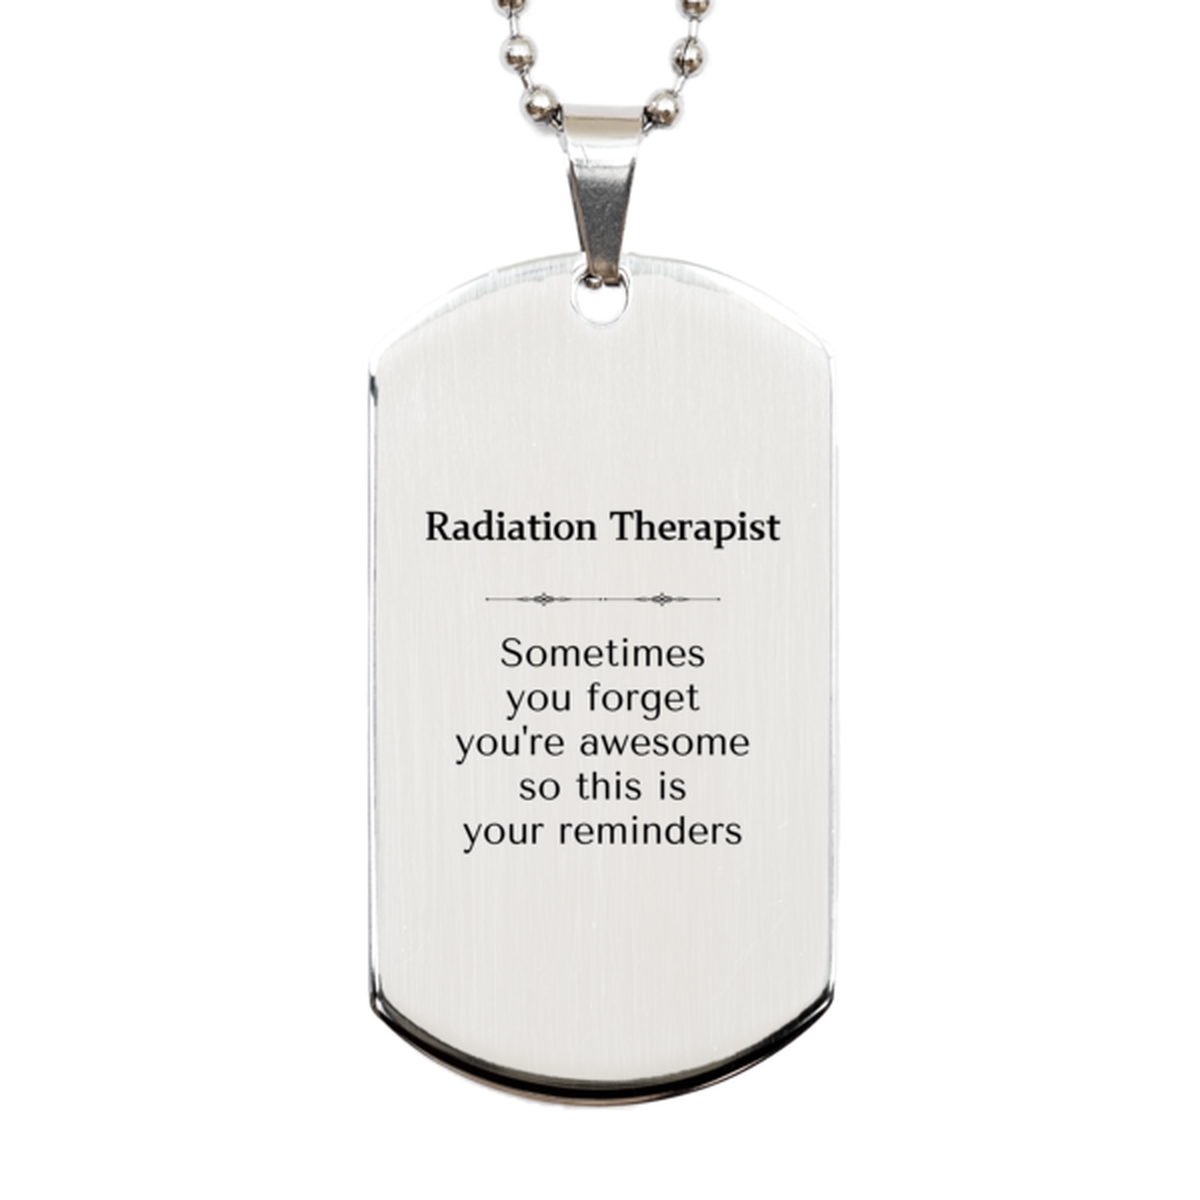 Sentimental Radiation Therapist Silver Dog Tag, Radiation Therapist Sometimes you forget you're awesome so this is your reminders, Graduation Christmas Birthday Gifts for Radiation Therapist, Men, Women, Coworkers